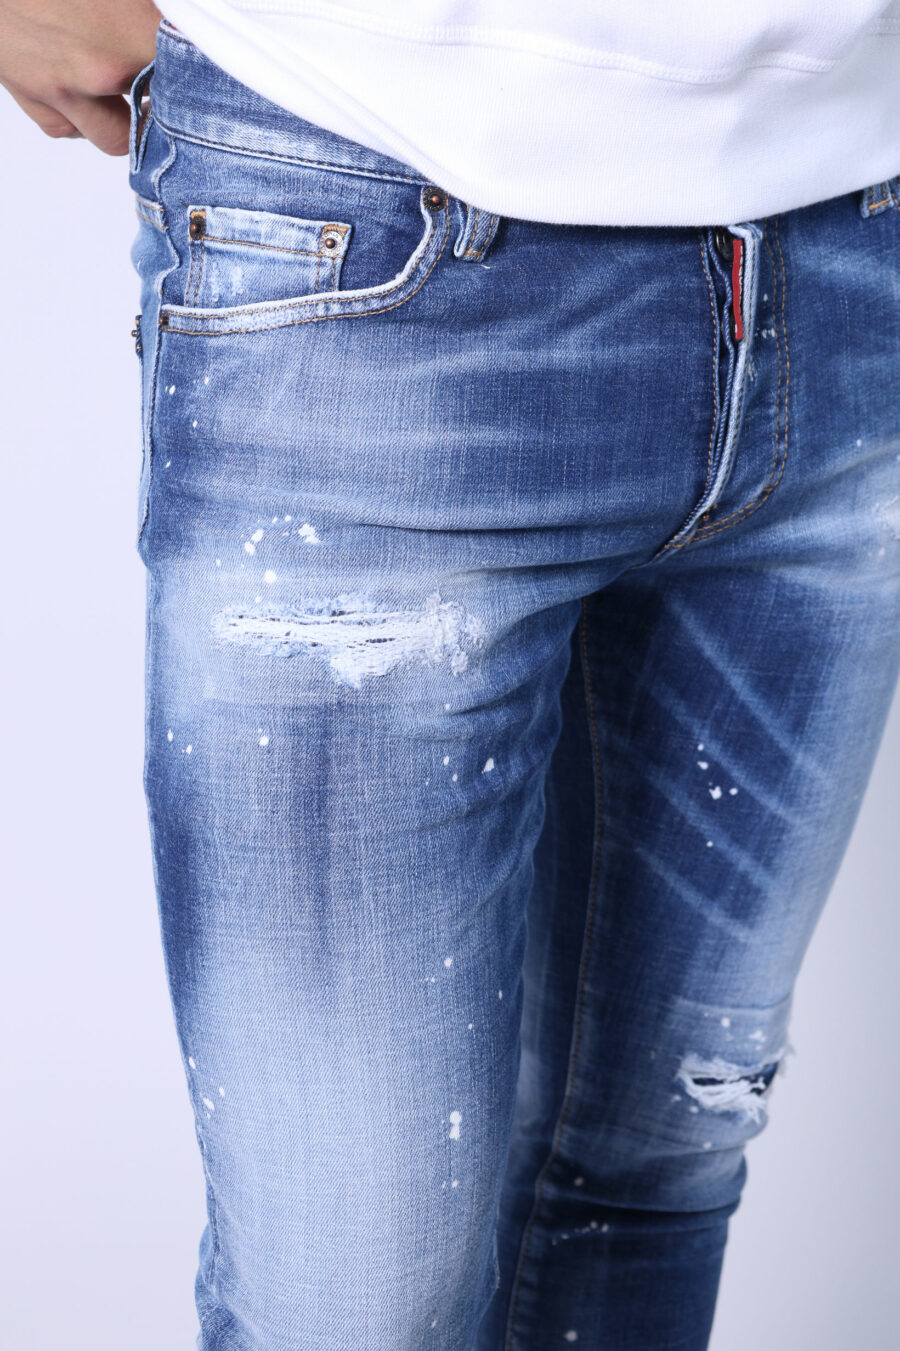 Light blue jeans "skater jean" worn and ripped - Untitled Catalog 05506